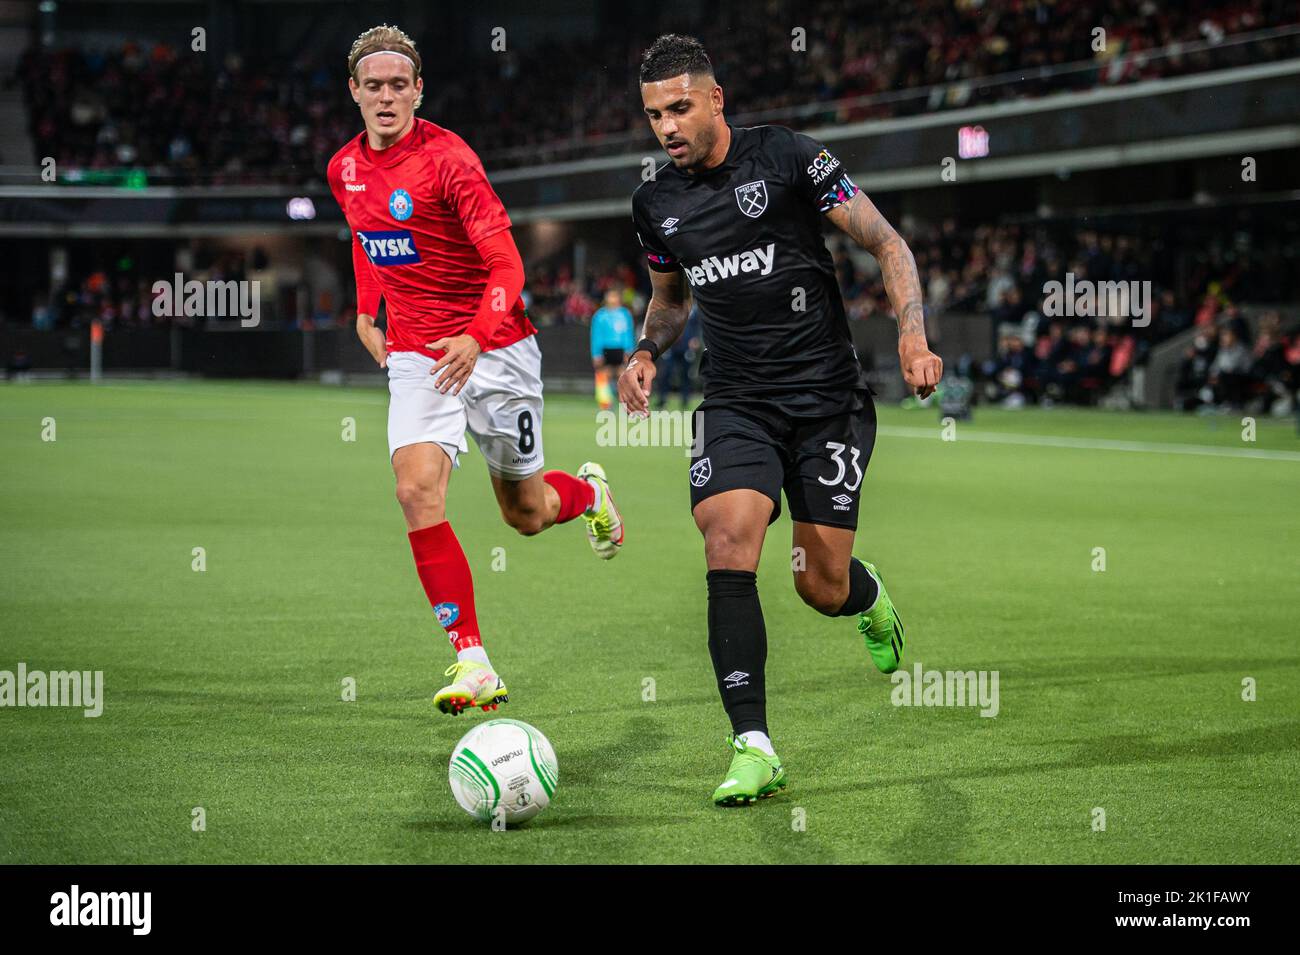 Silkeborg, Denmark. 15th, September 2022. Emerson (33) of West Ham seen during the UEFA Europa Conference League match between Silkeborg IF and West Ham at JYSK Park in Silkeborg. (Photo credit: Gonzales Photo - Morten Kjaer). Stock Photo